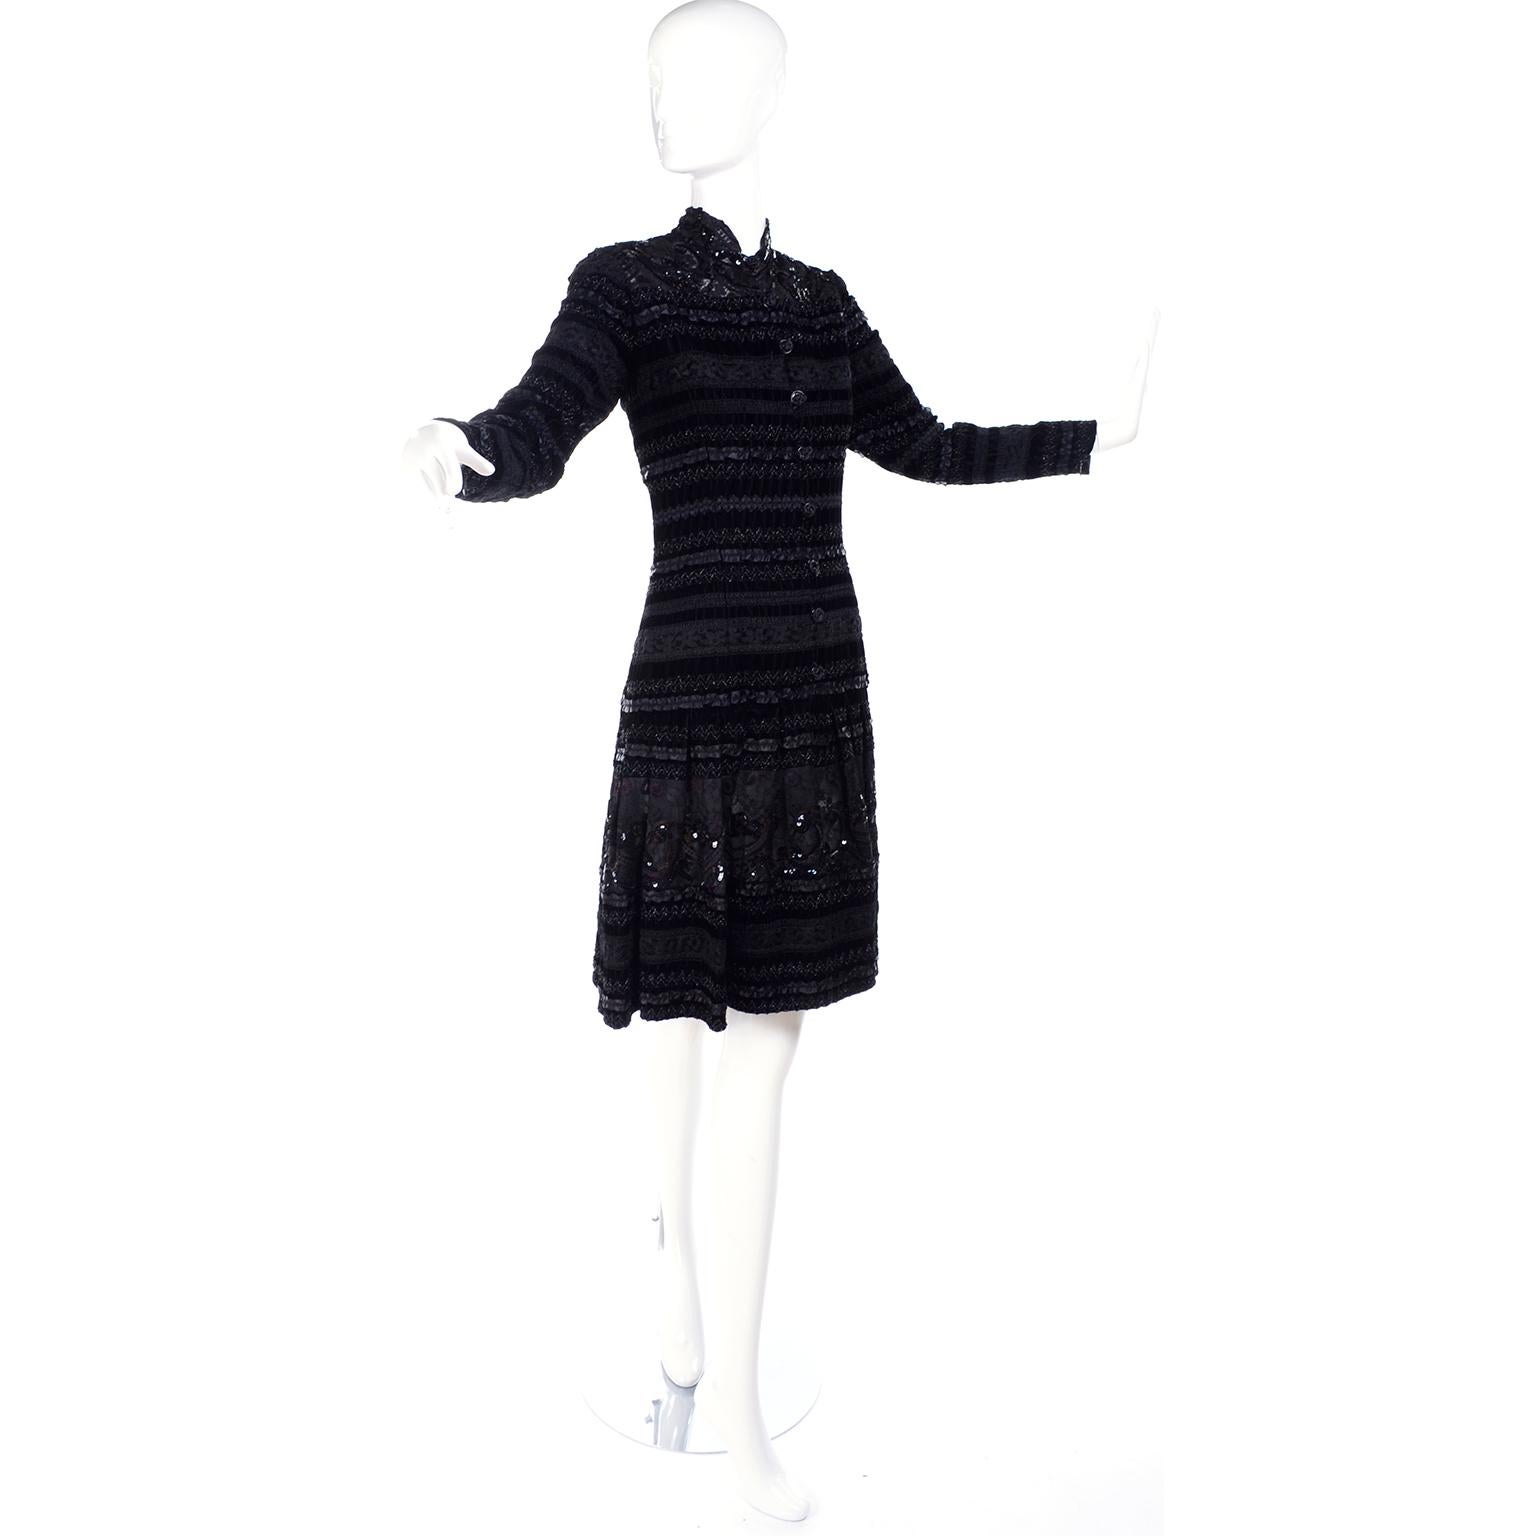 You would have to actually touch this incredible vintage black Emanuel Ungaro dress to appreciate the fine workmanship that went into creating it!  The Unaro Parallele dress is lined and made of horizontal rows of lace and velvet, the lace is